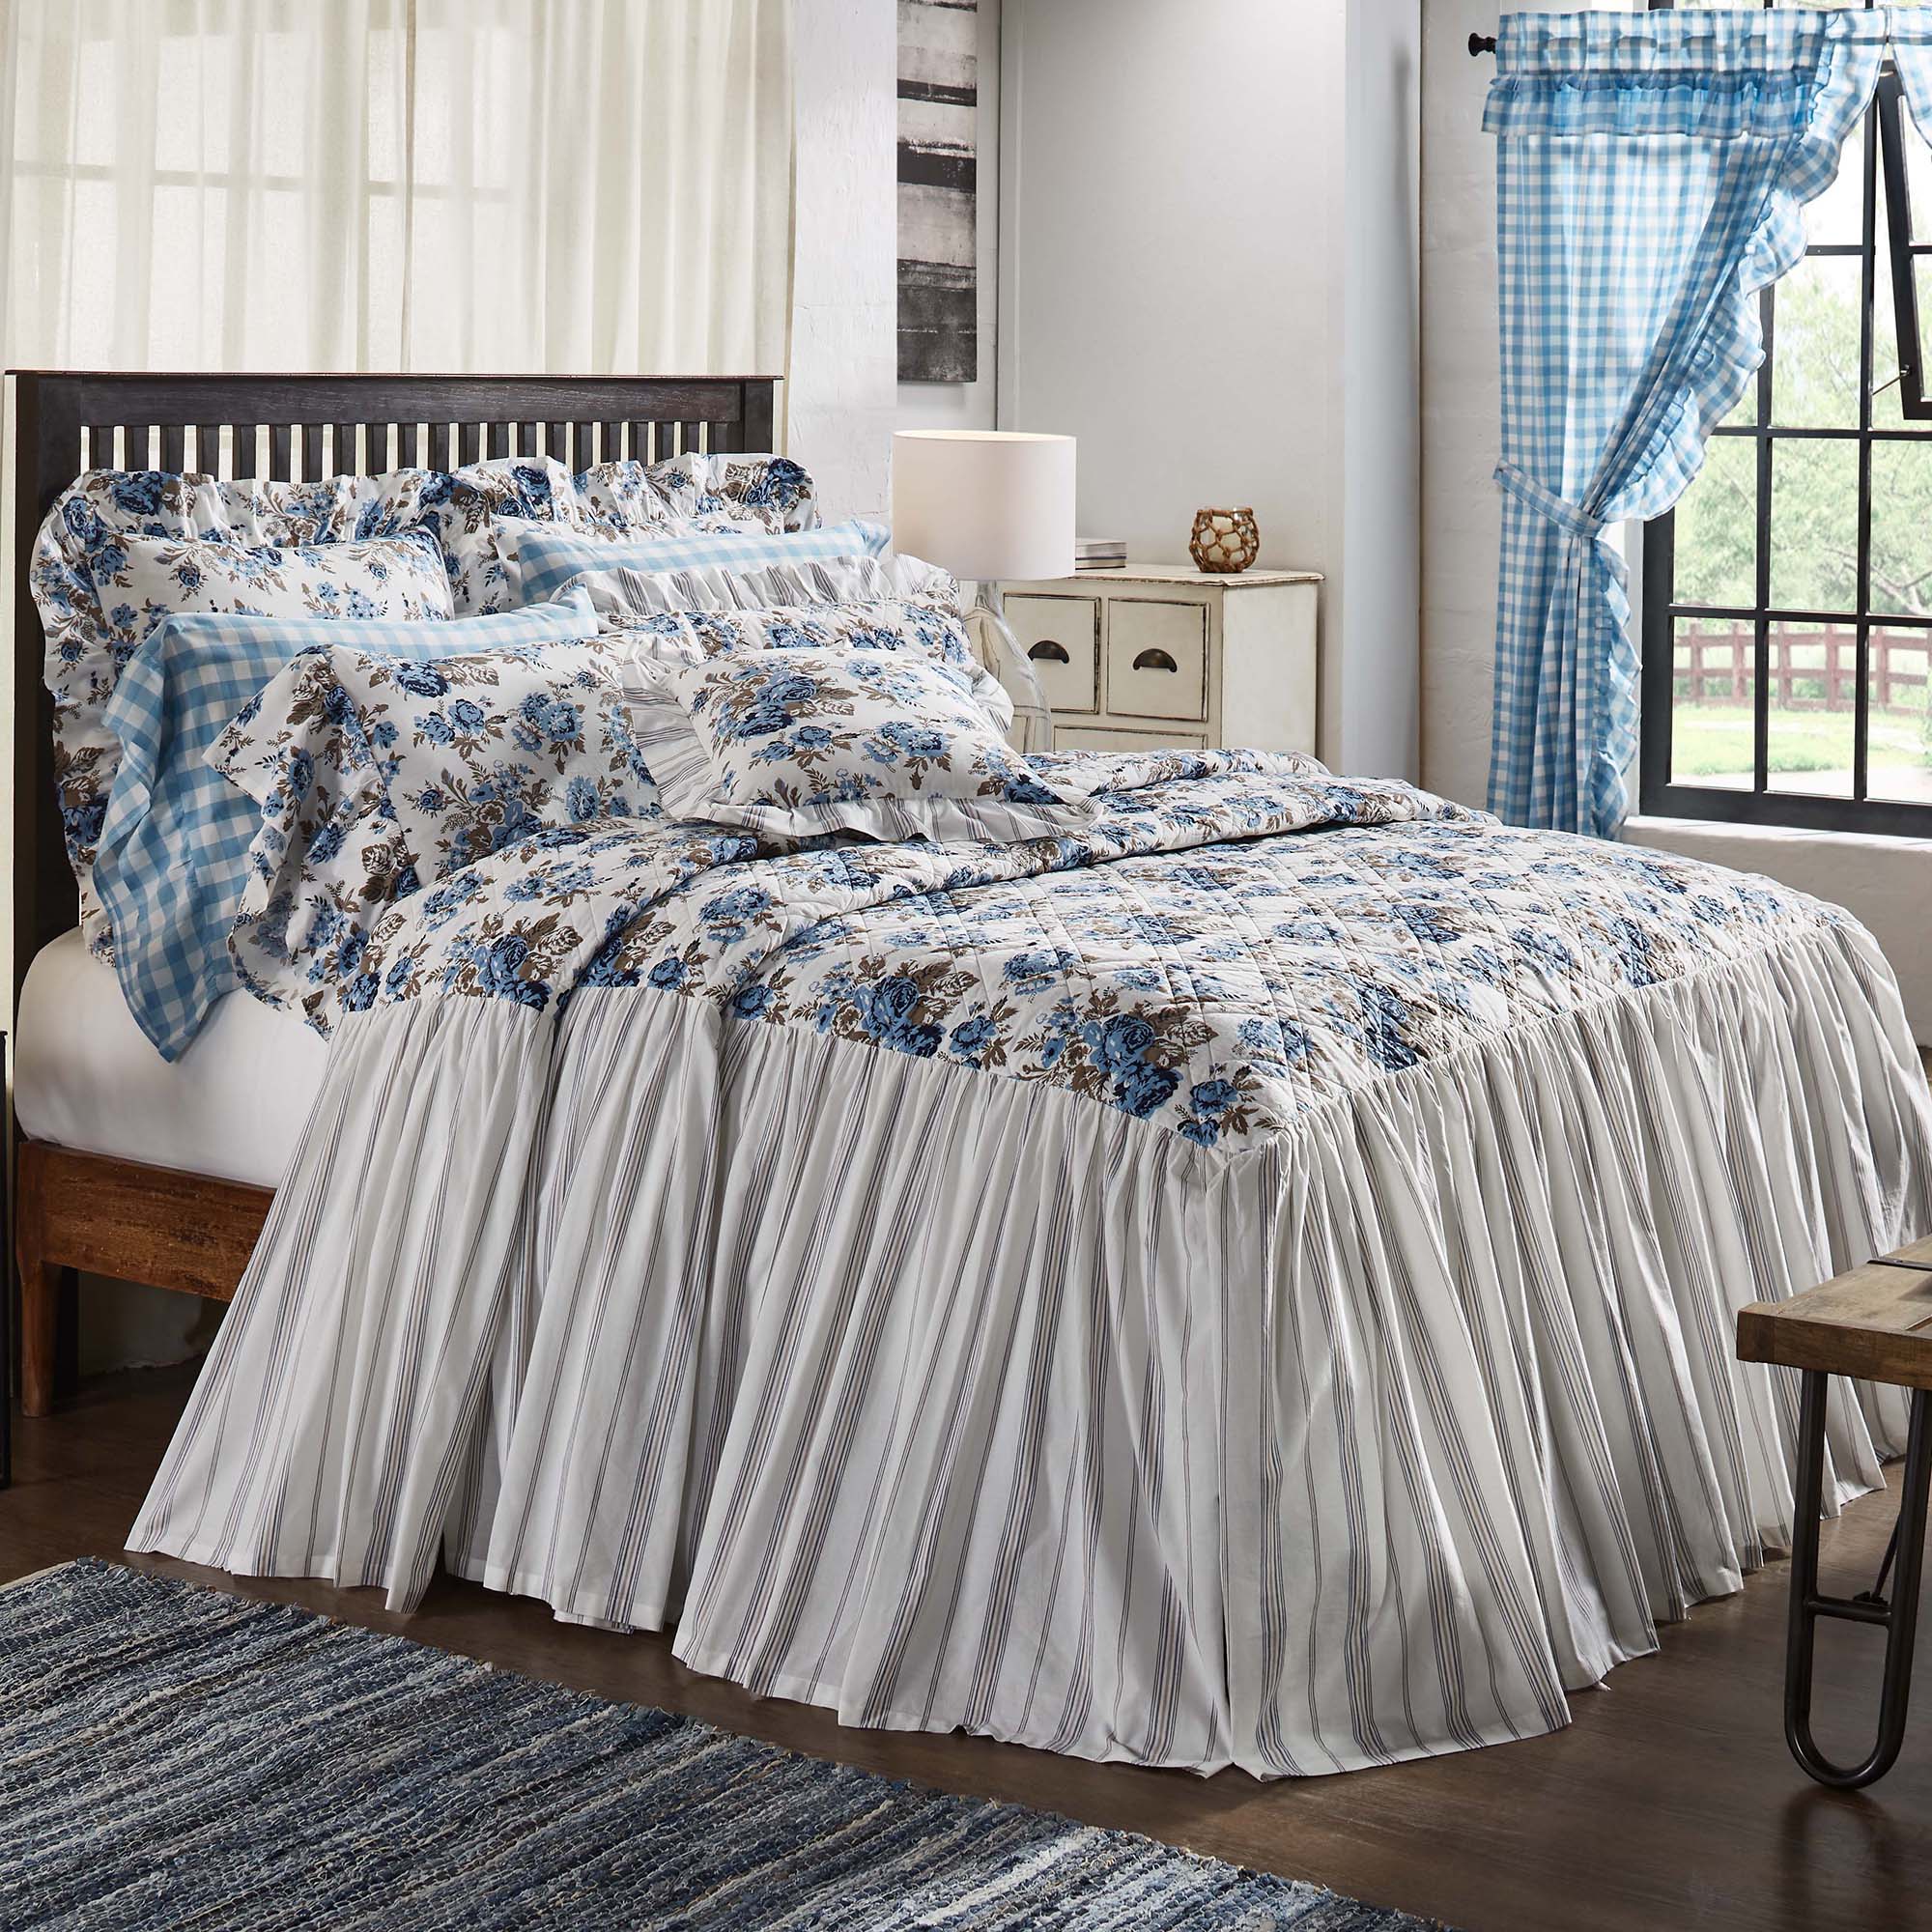 April & Olive Annie Blue Floral Ruffled Queen Coverlet 80x60+27 By VHC Brands